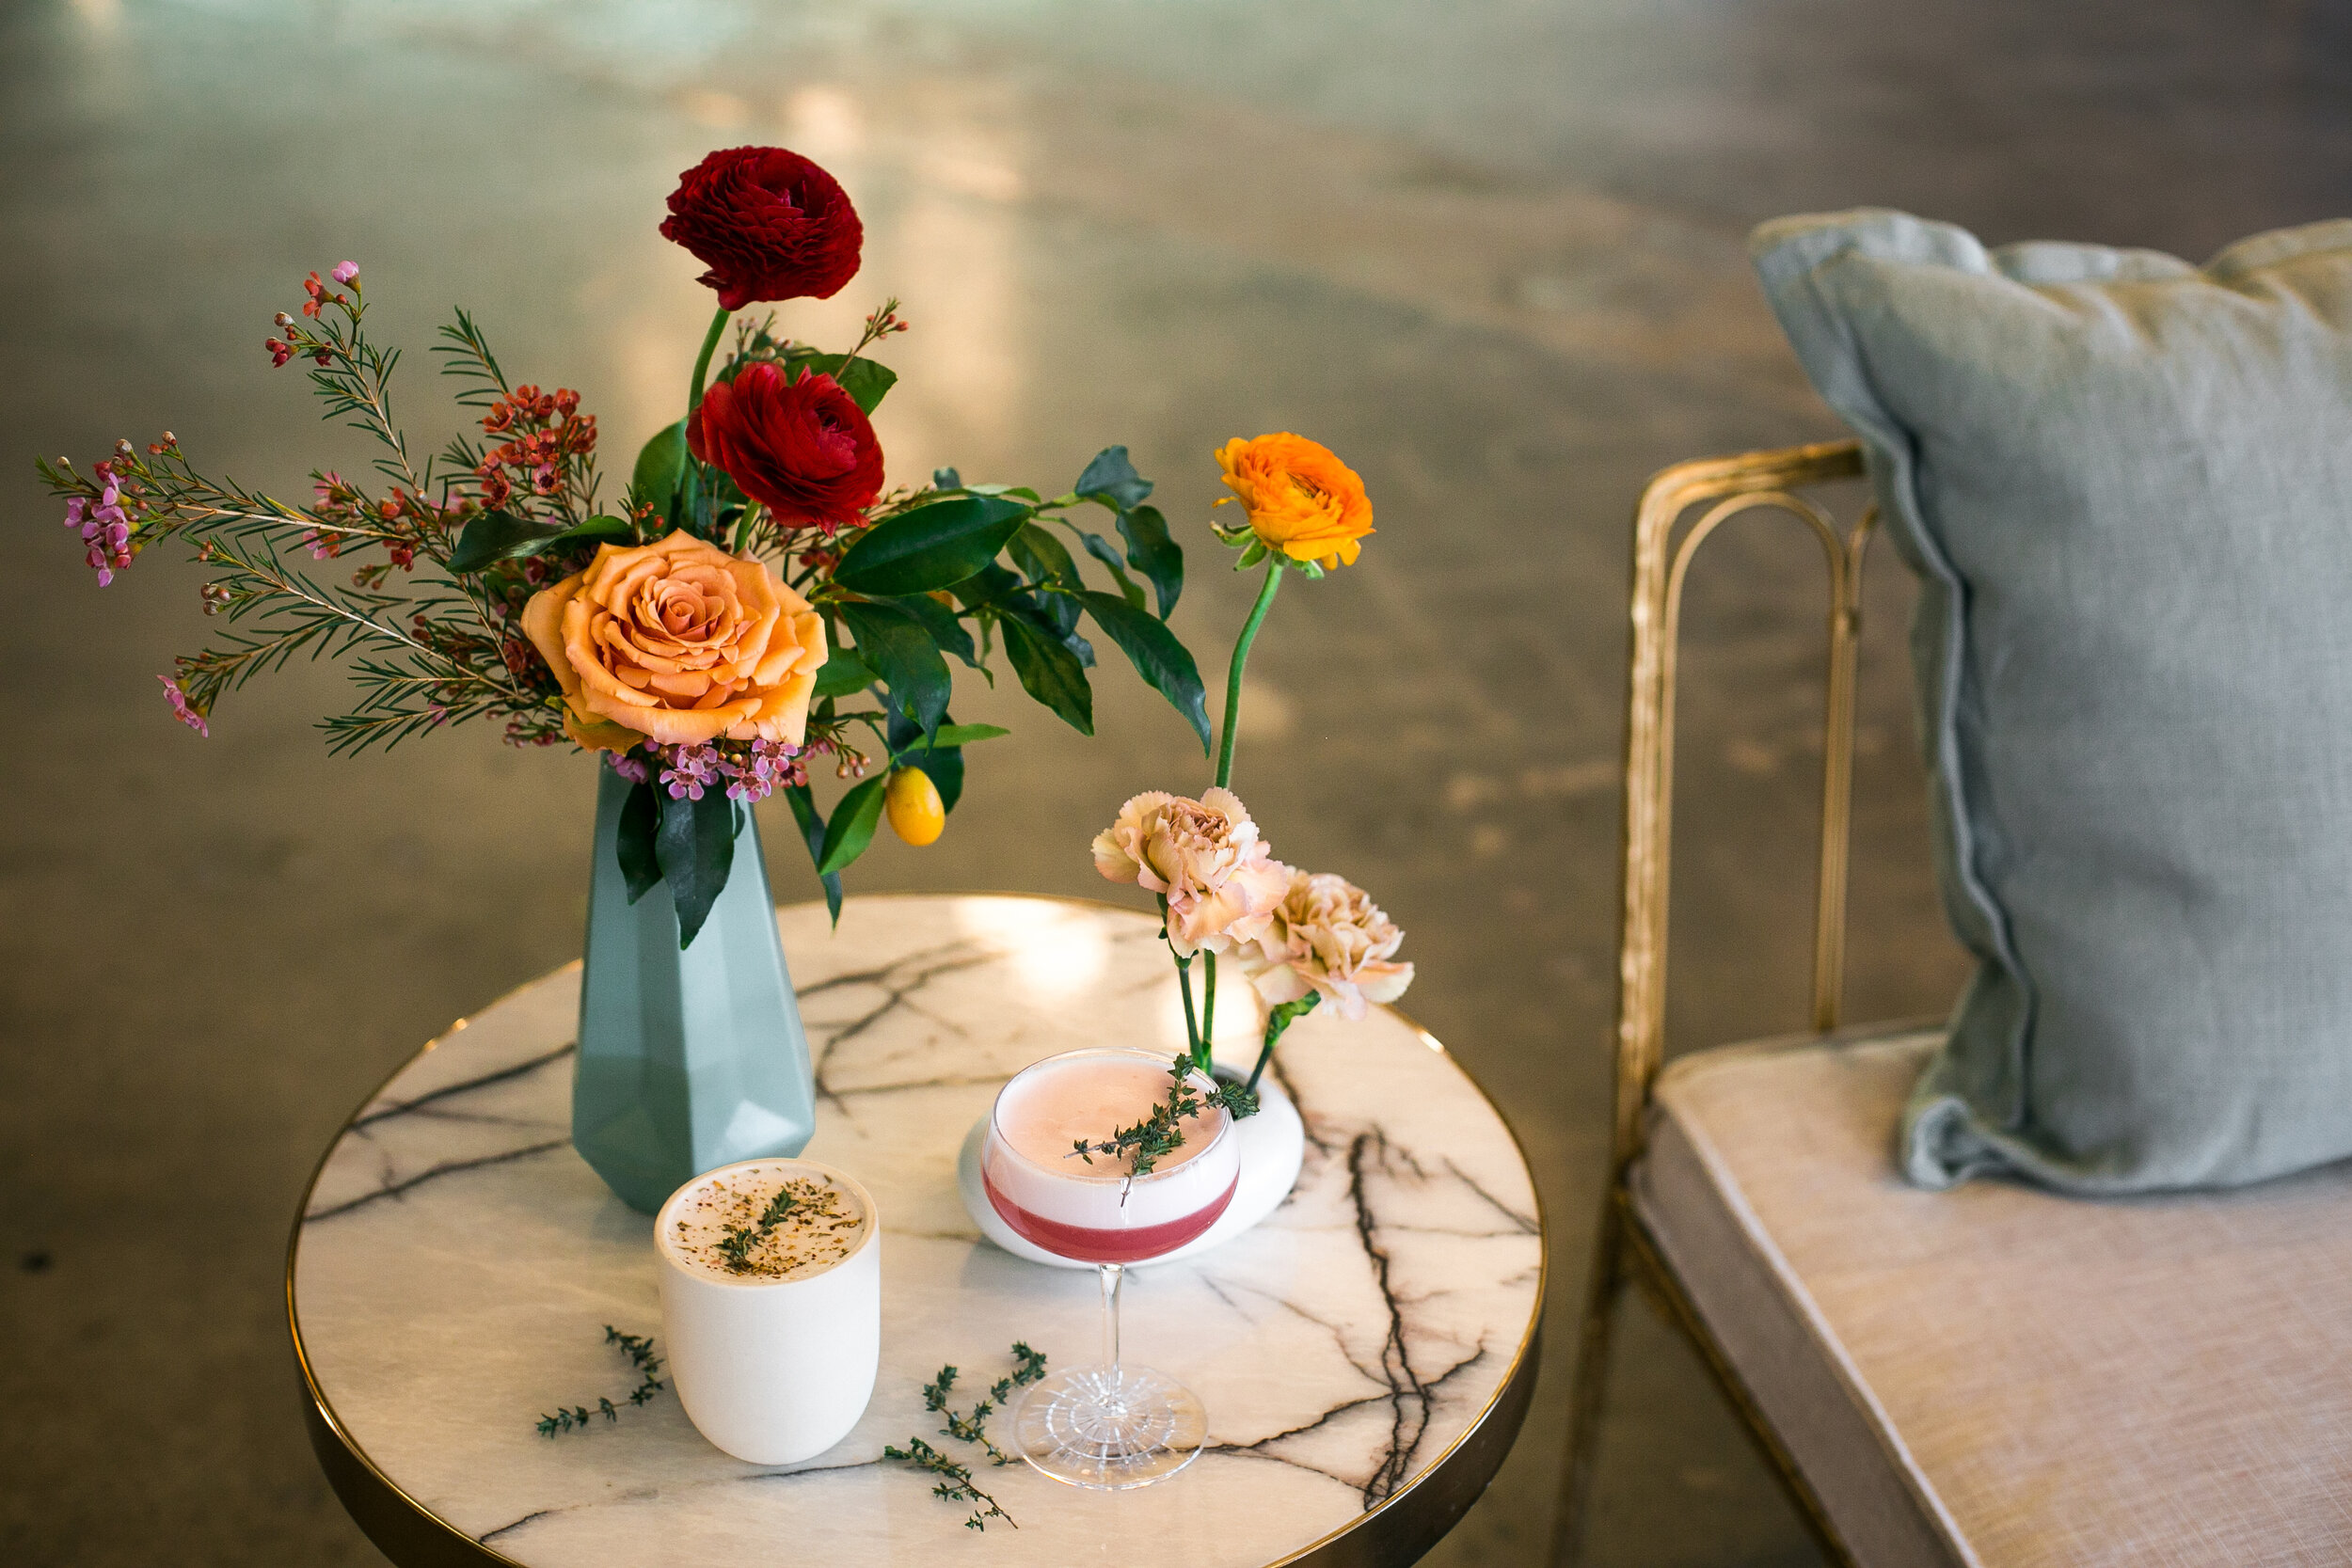 Cute little table with roses